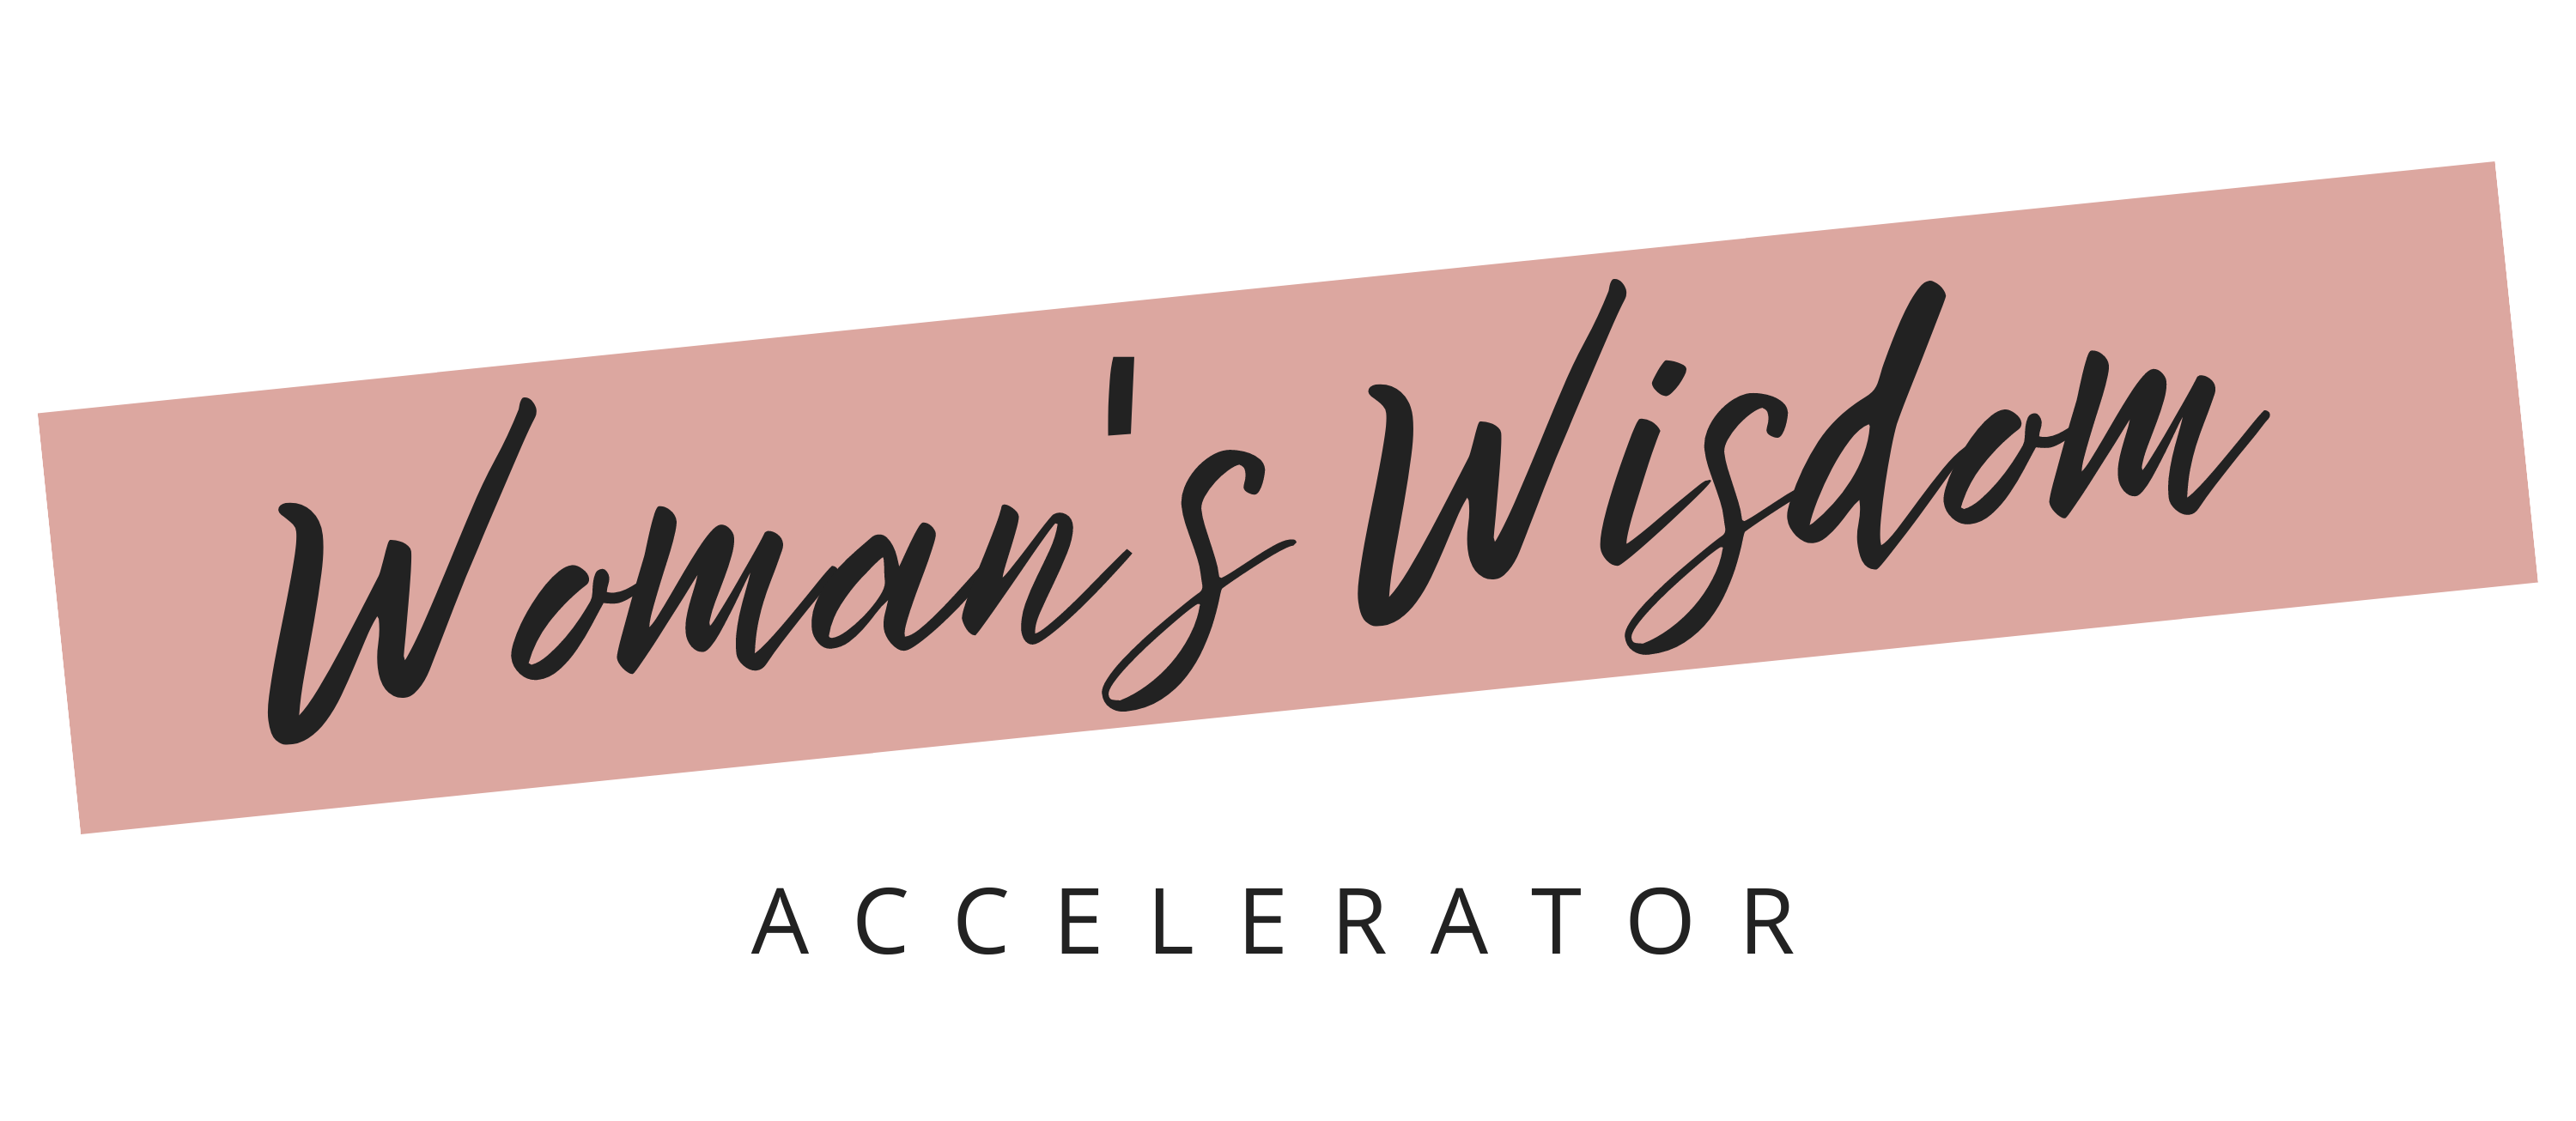 Women's Wisdom Accelerator Group Led by Kalyna Miletic of the Lead Today Show, Kickstart Your Work and Chiefly